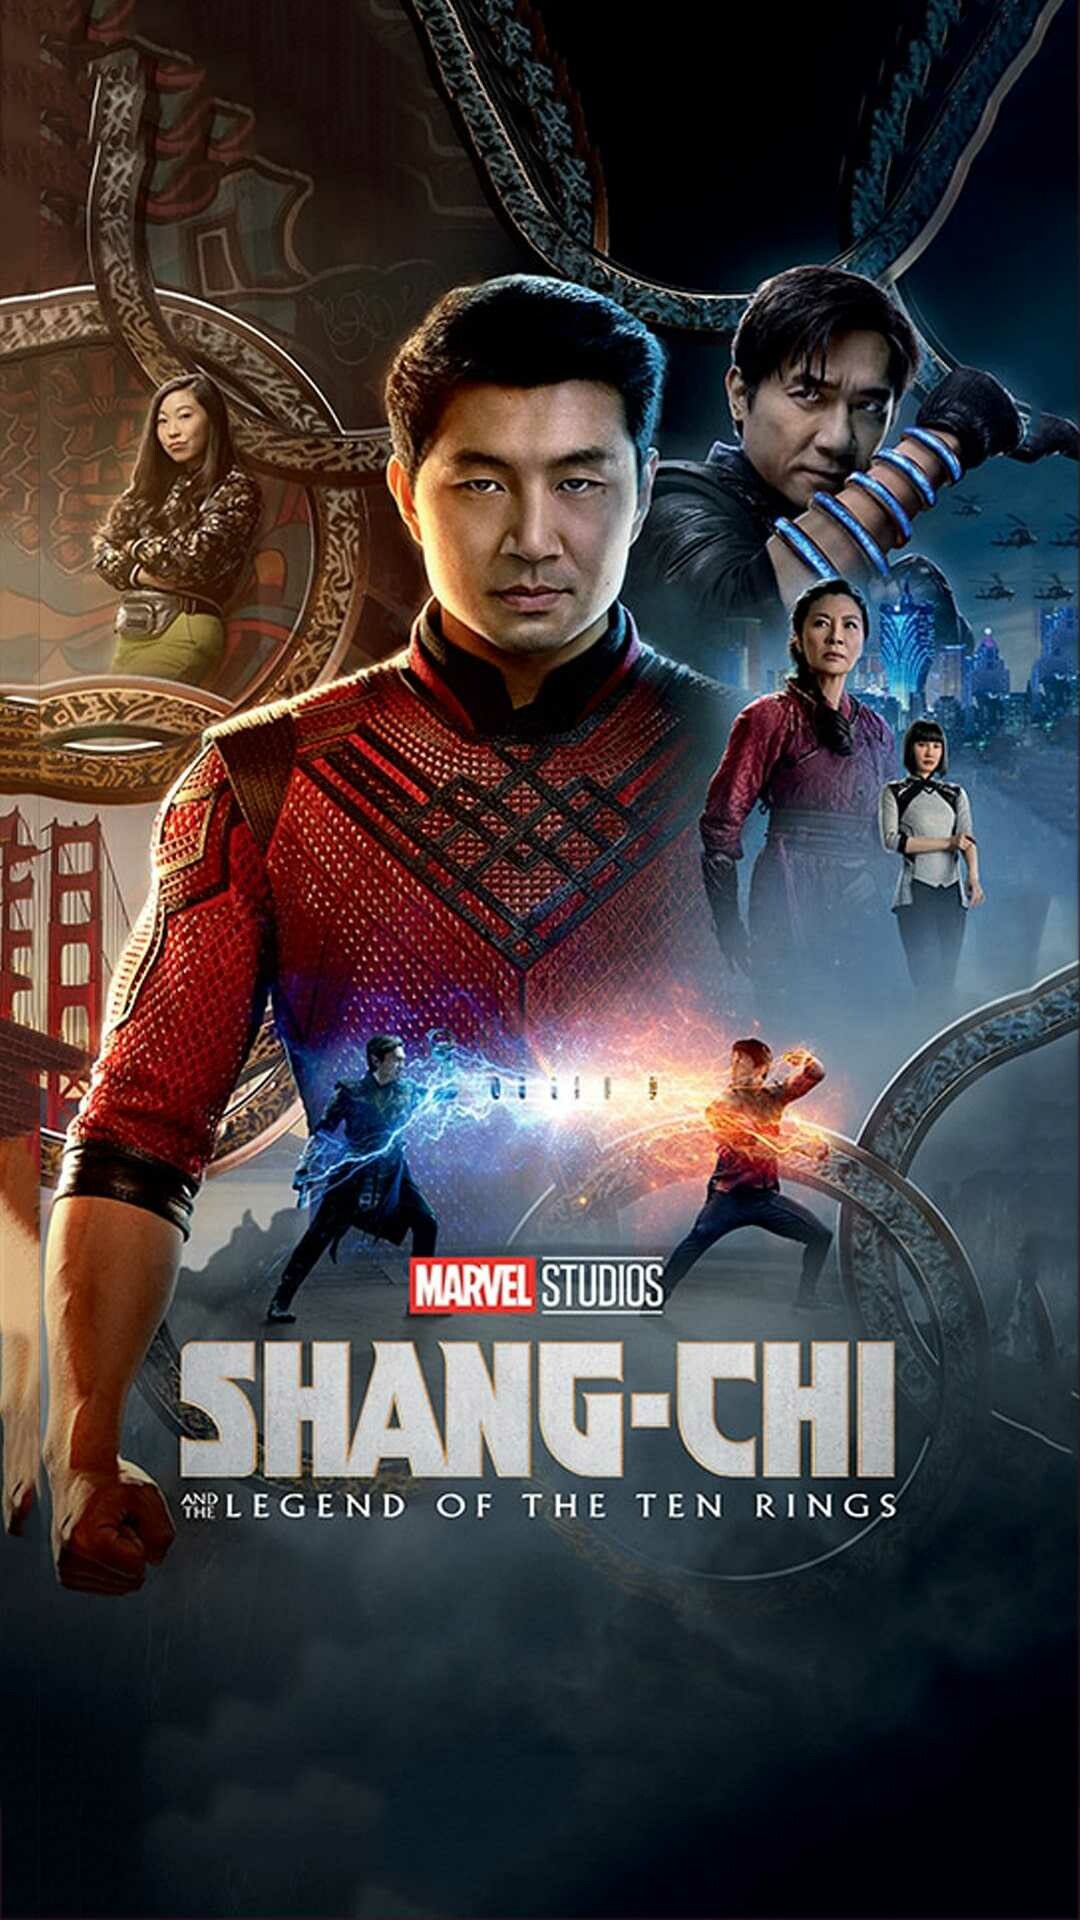 Shang-Chi and the Legend of the Ten Rings: The film has been widely praised as a major step forward as Hollywood tries to improve the representation of Asians and Asian Americans. 1080x1920 Full HD Wallpaper.